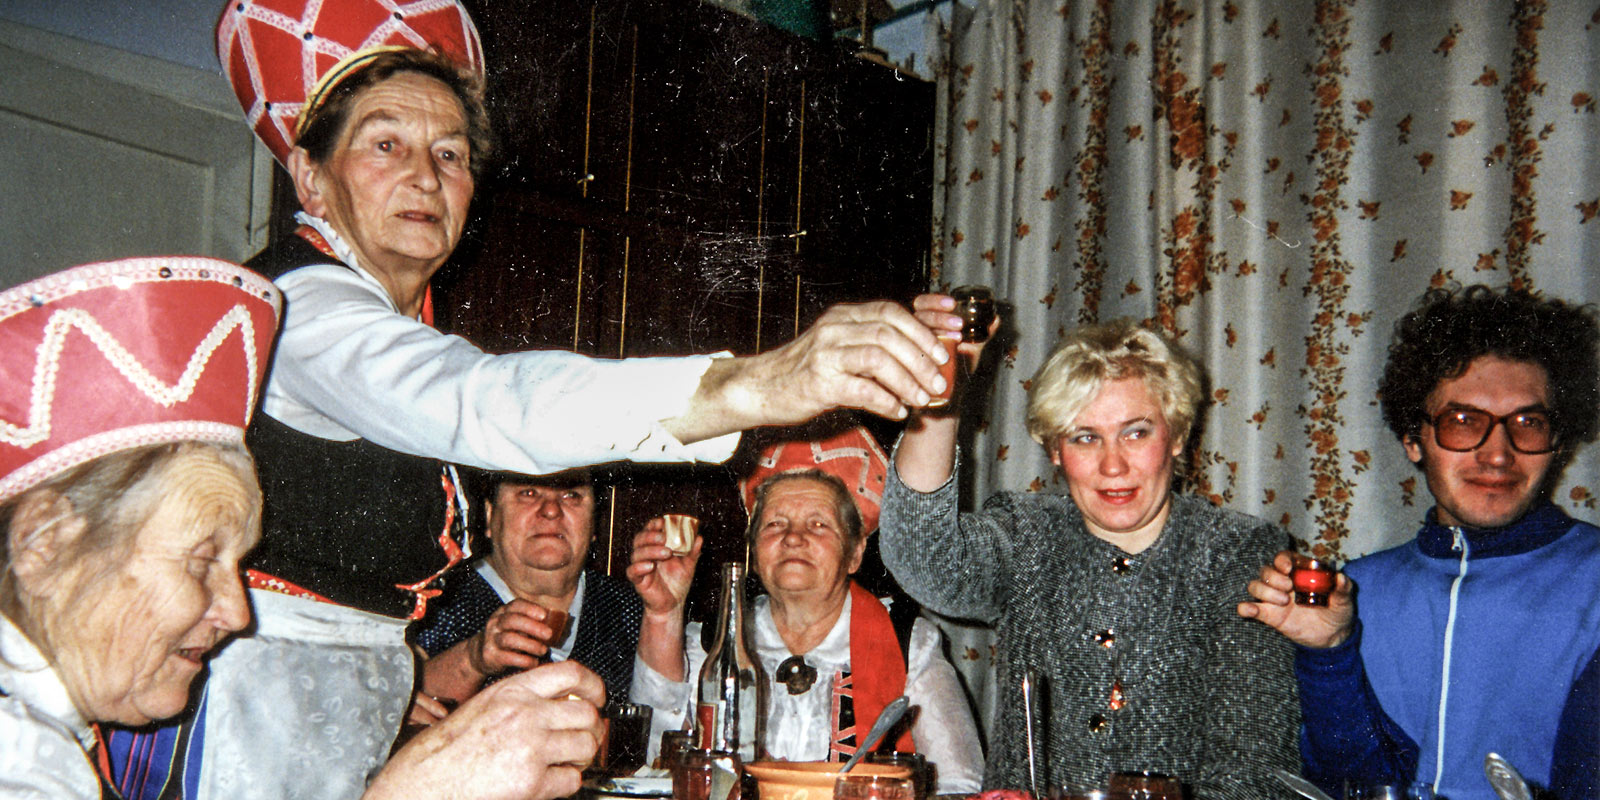 The party is in full swing. The toast is proposed by Linda Tsirk, leader of the Tsvetnopolye Estonians’ vocal ensemble. Photo: A. Korb 1997.